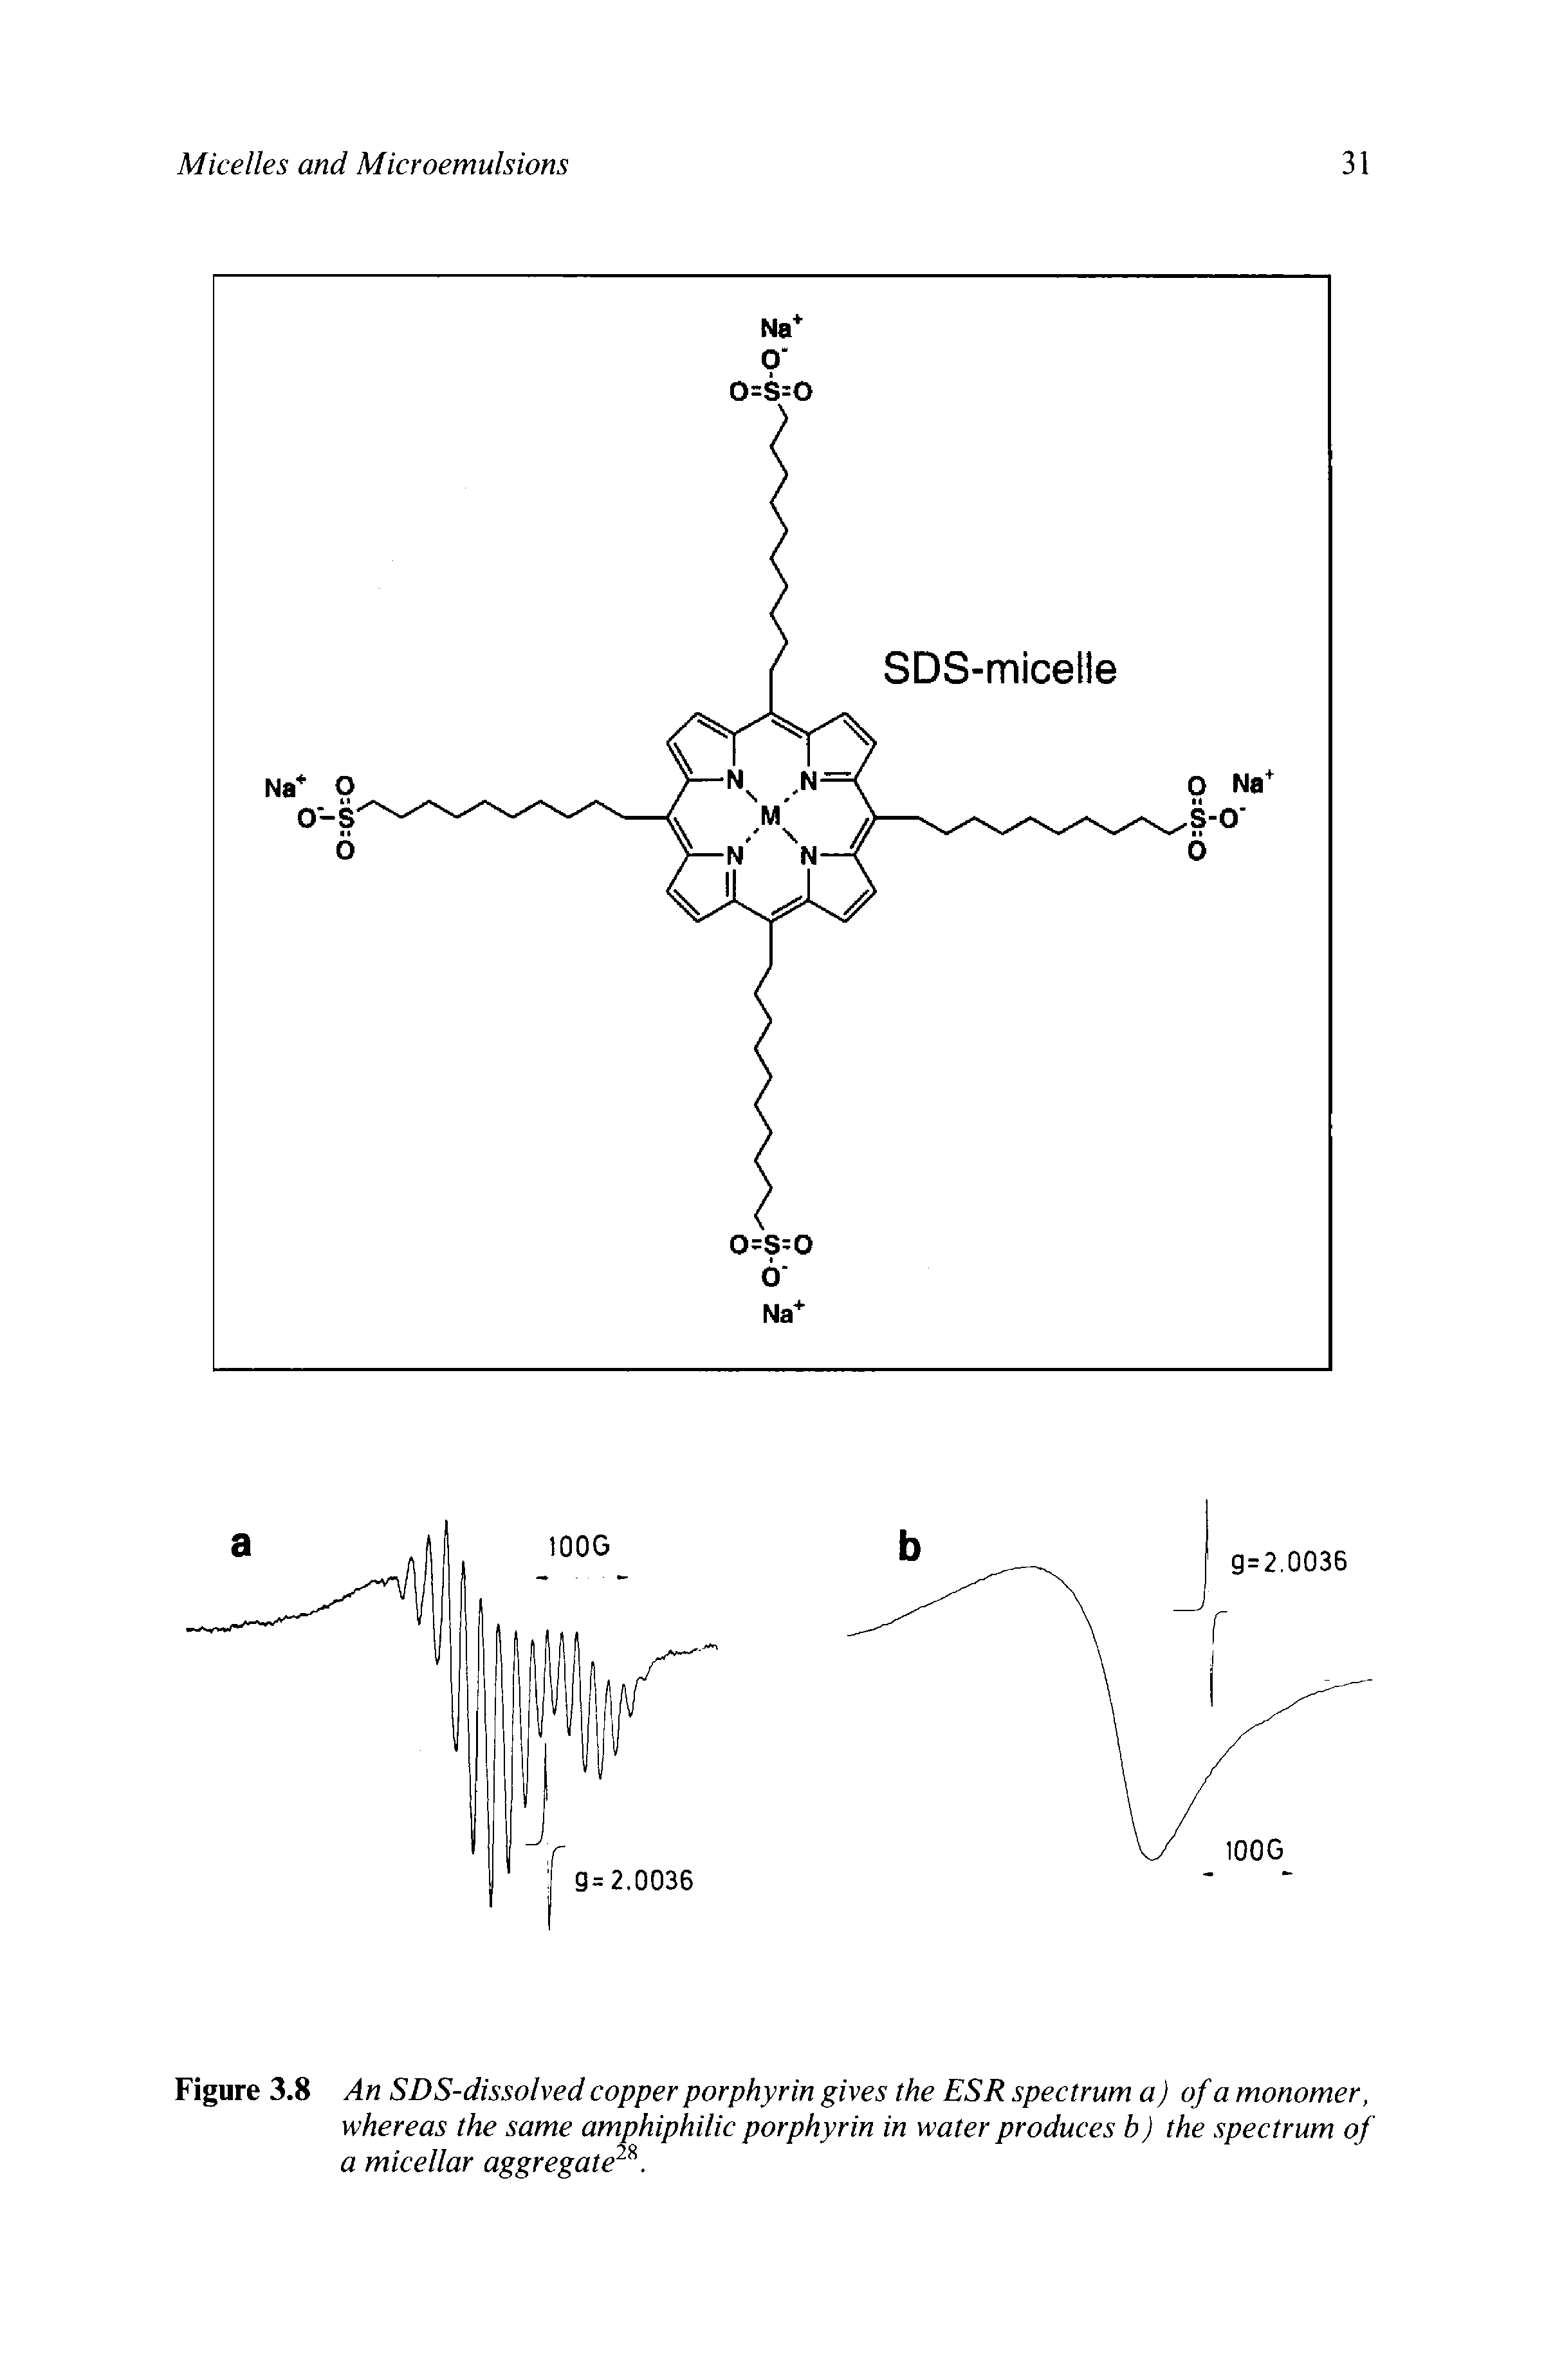 Figure 3.8 An SDS-dissolved copper porphyrin gives the ESR spectrum a) of a monomer, whereas the same amphiphilic porphyrin in water produces b) the spectrum of a micellar aggregate. ...